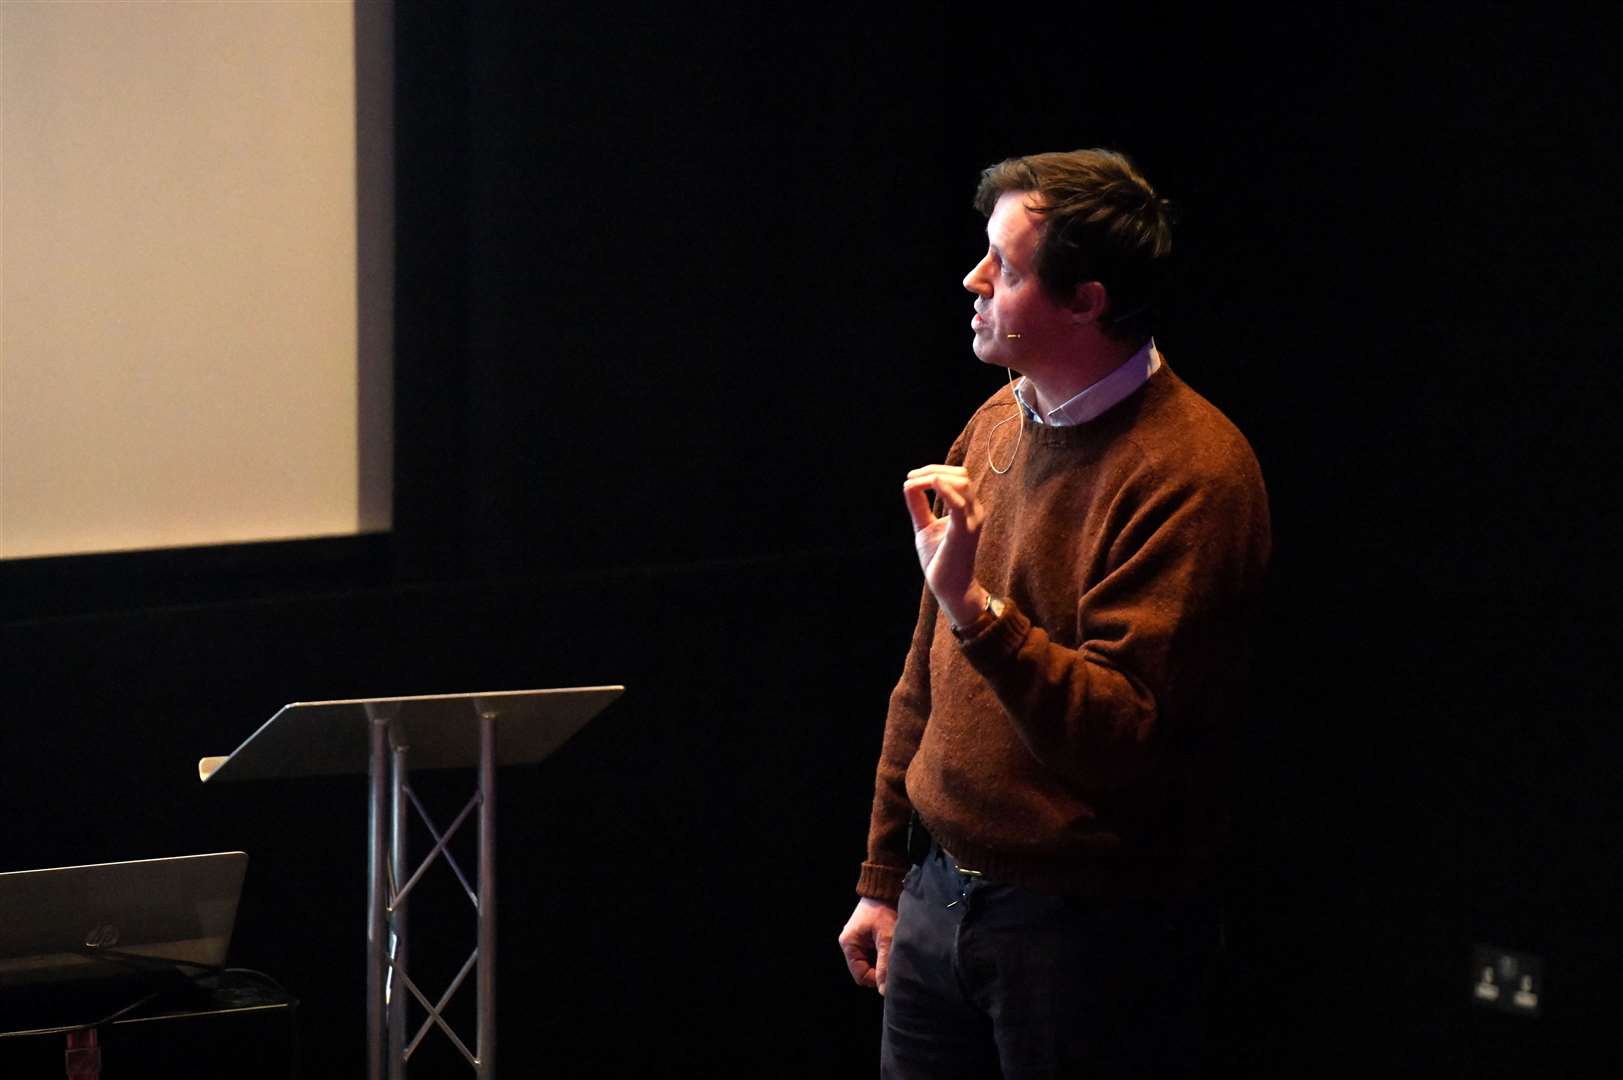 Angus MacDonald, serial entrepreneur, giving his presentation at the start of the evening. Picture: James Mackenzie.